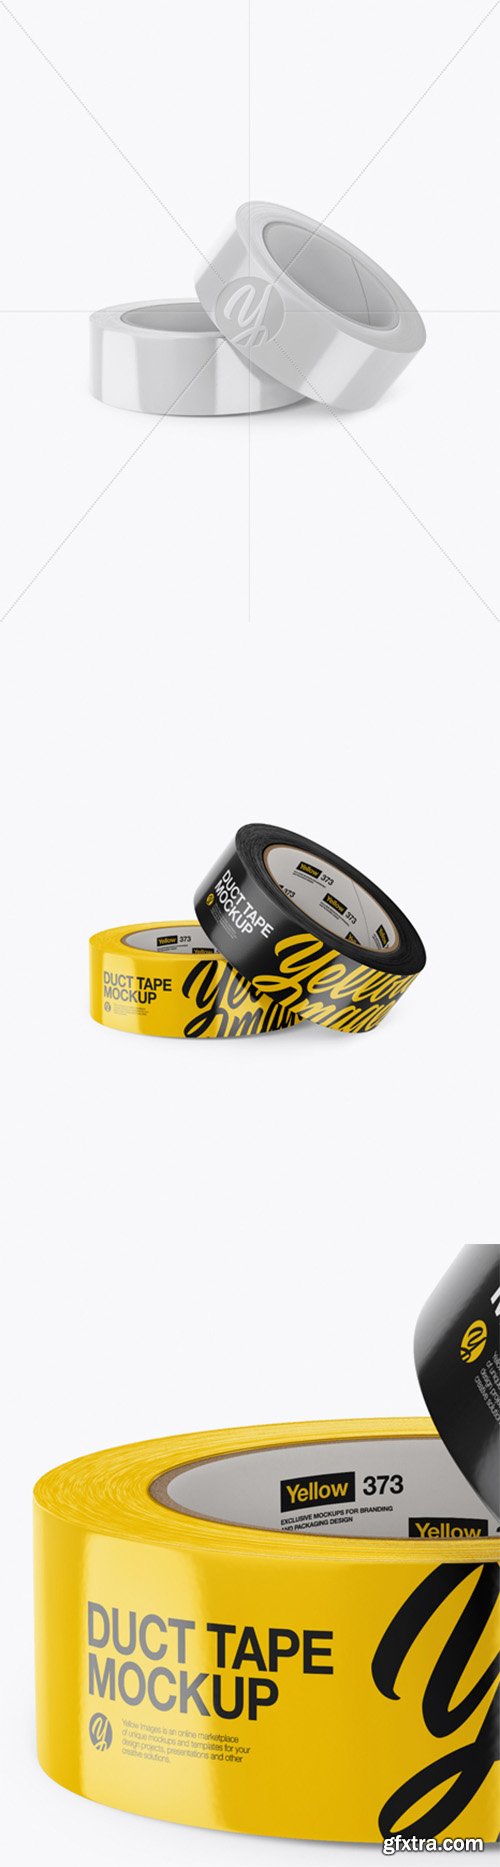 Two Glossy Duct Tape Rolls Mockup 24153